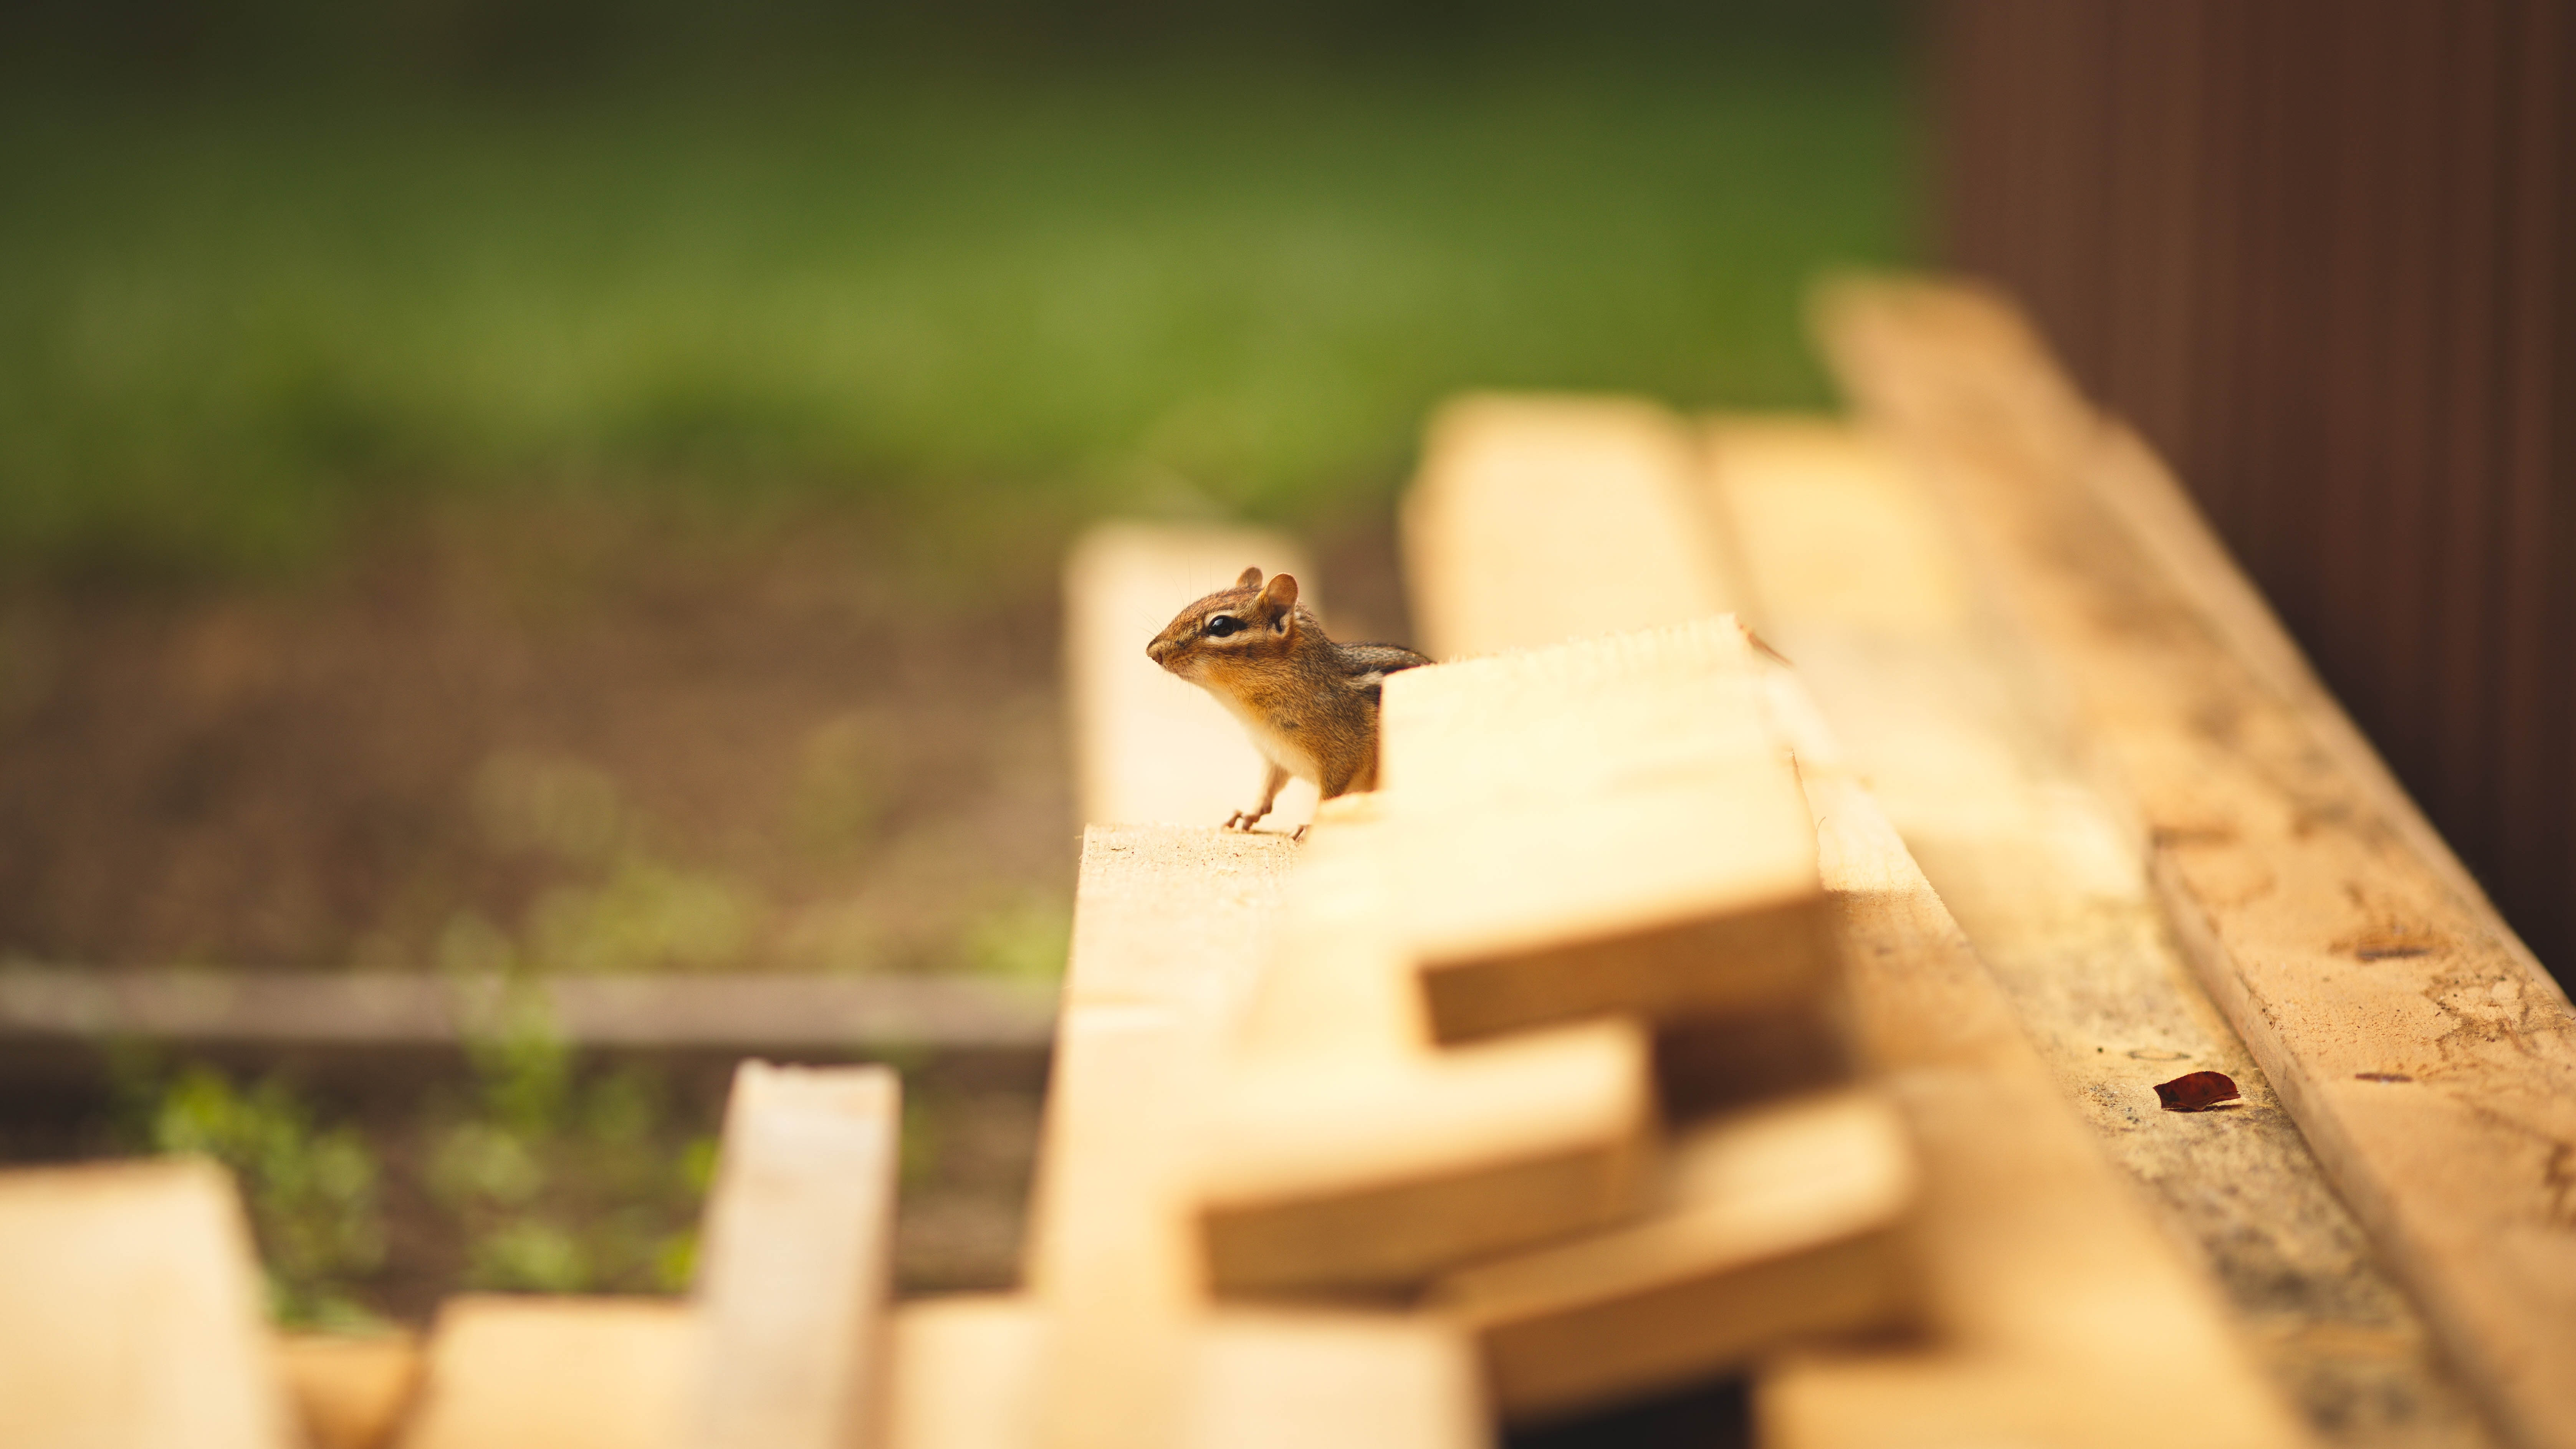 A chipmunk hiding in a pile of wooden planks